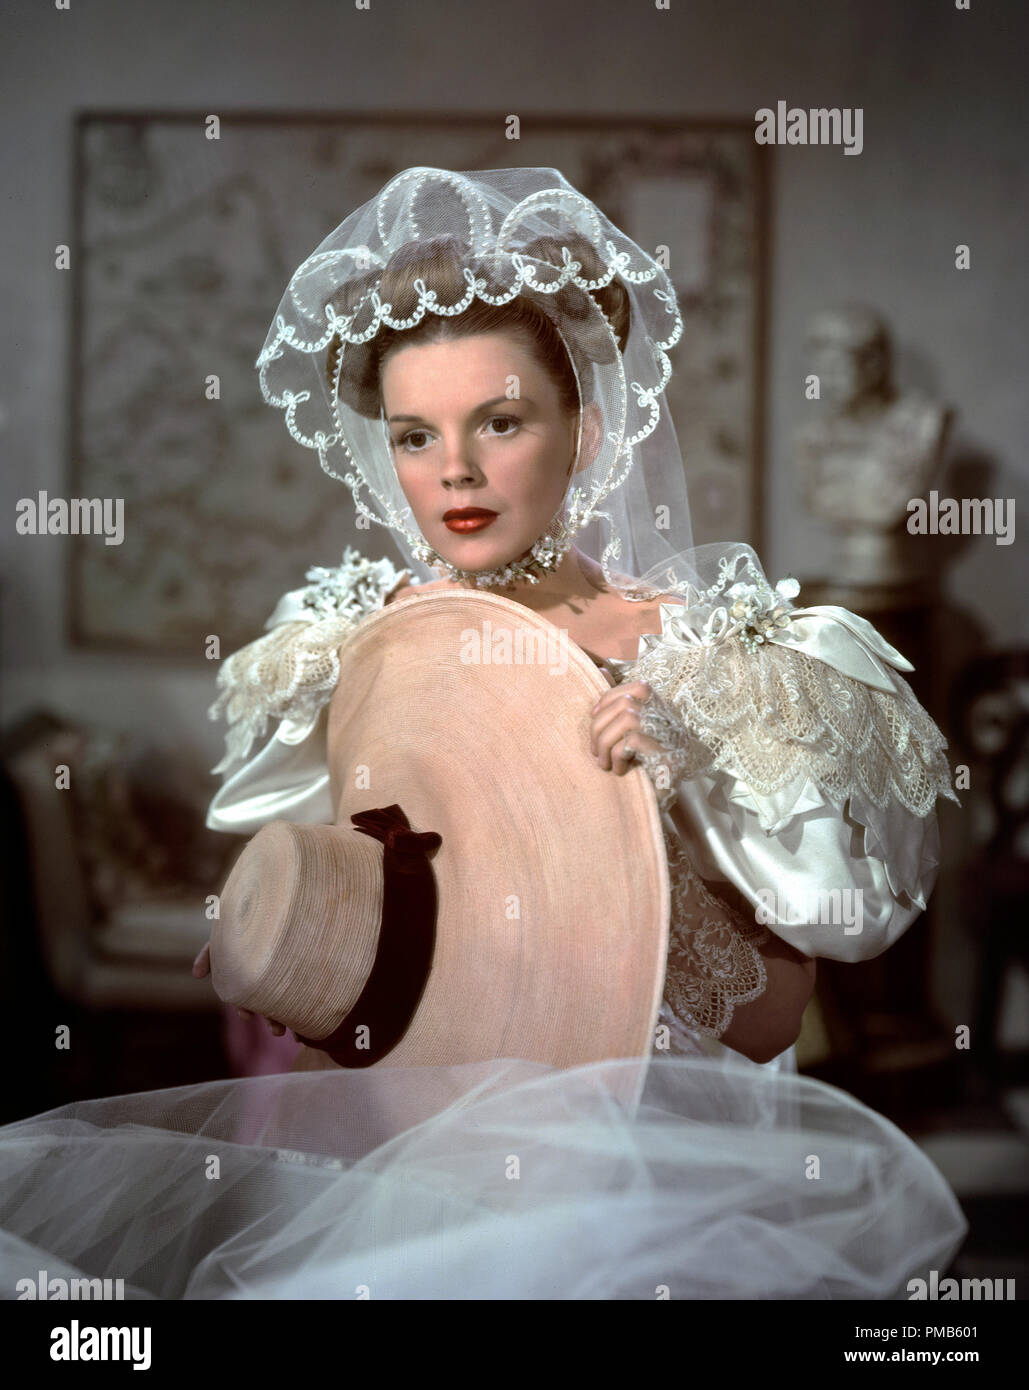 Judy Garland, 'The Pirate' (1948) MGM  File Reference # 33536 749THA  For Editorial Use Only -  All Rights Reserved Stock Photo